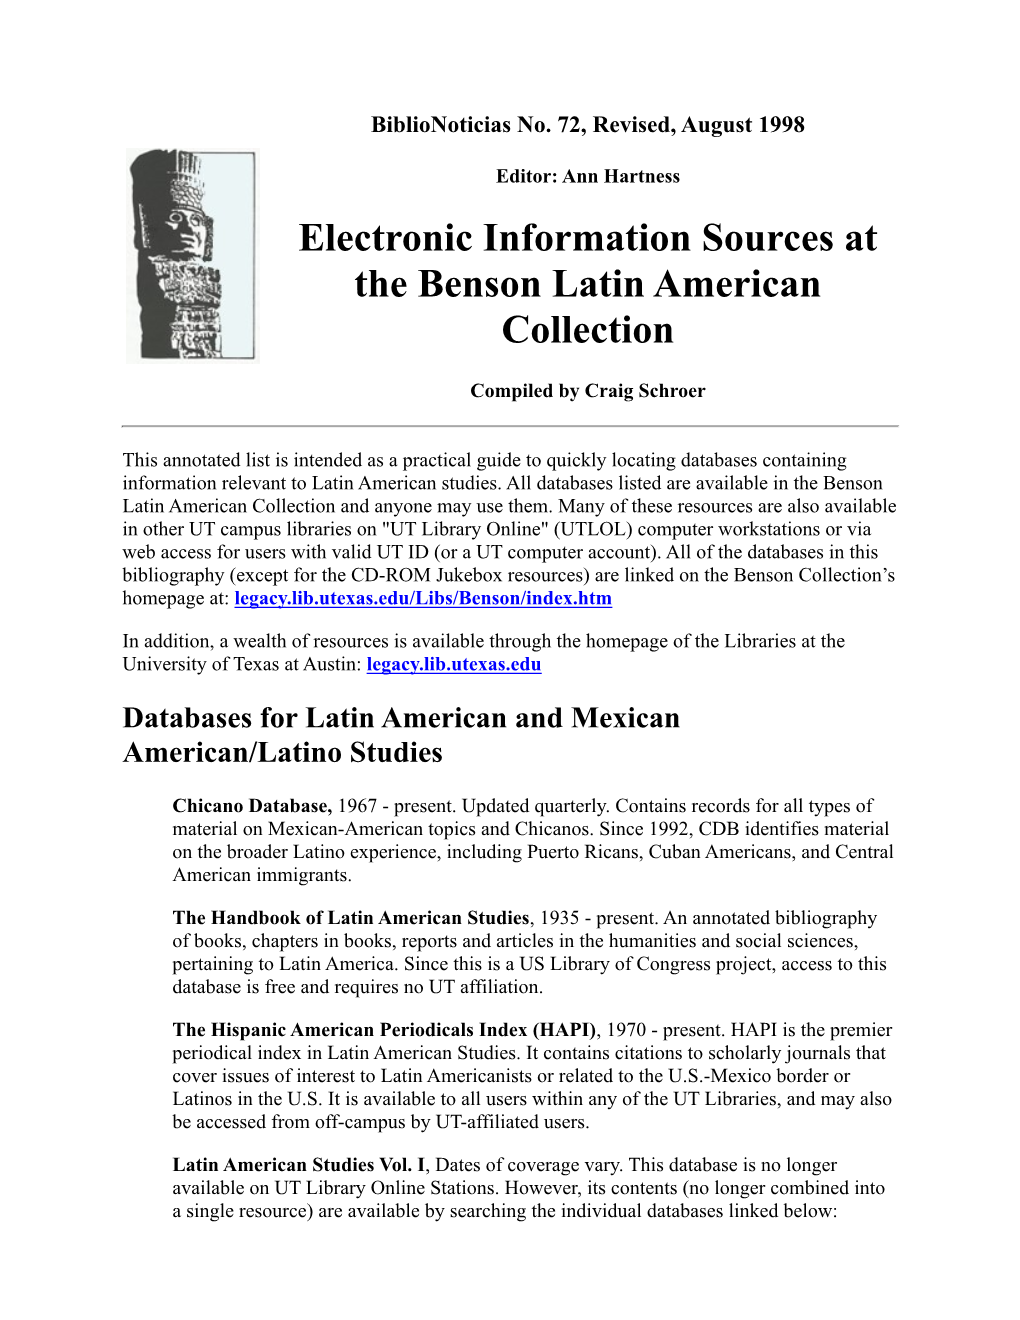 Electronic Information Sources at the Benson Latin American Collection